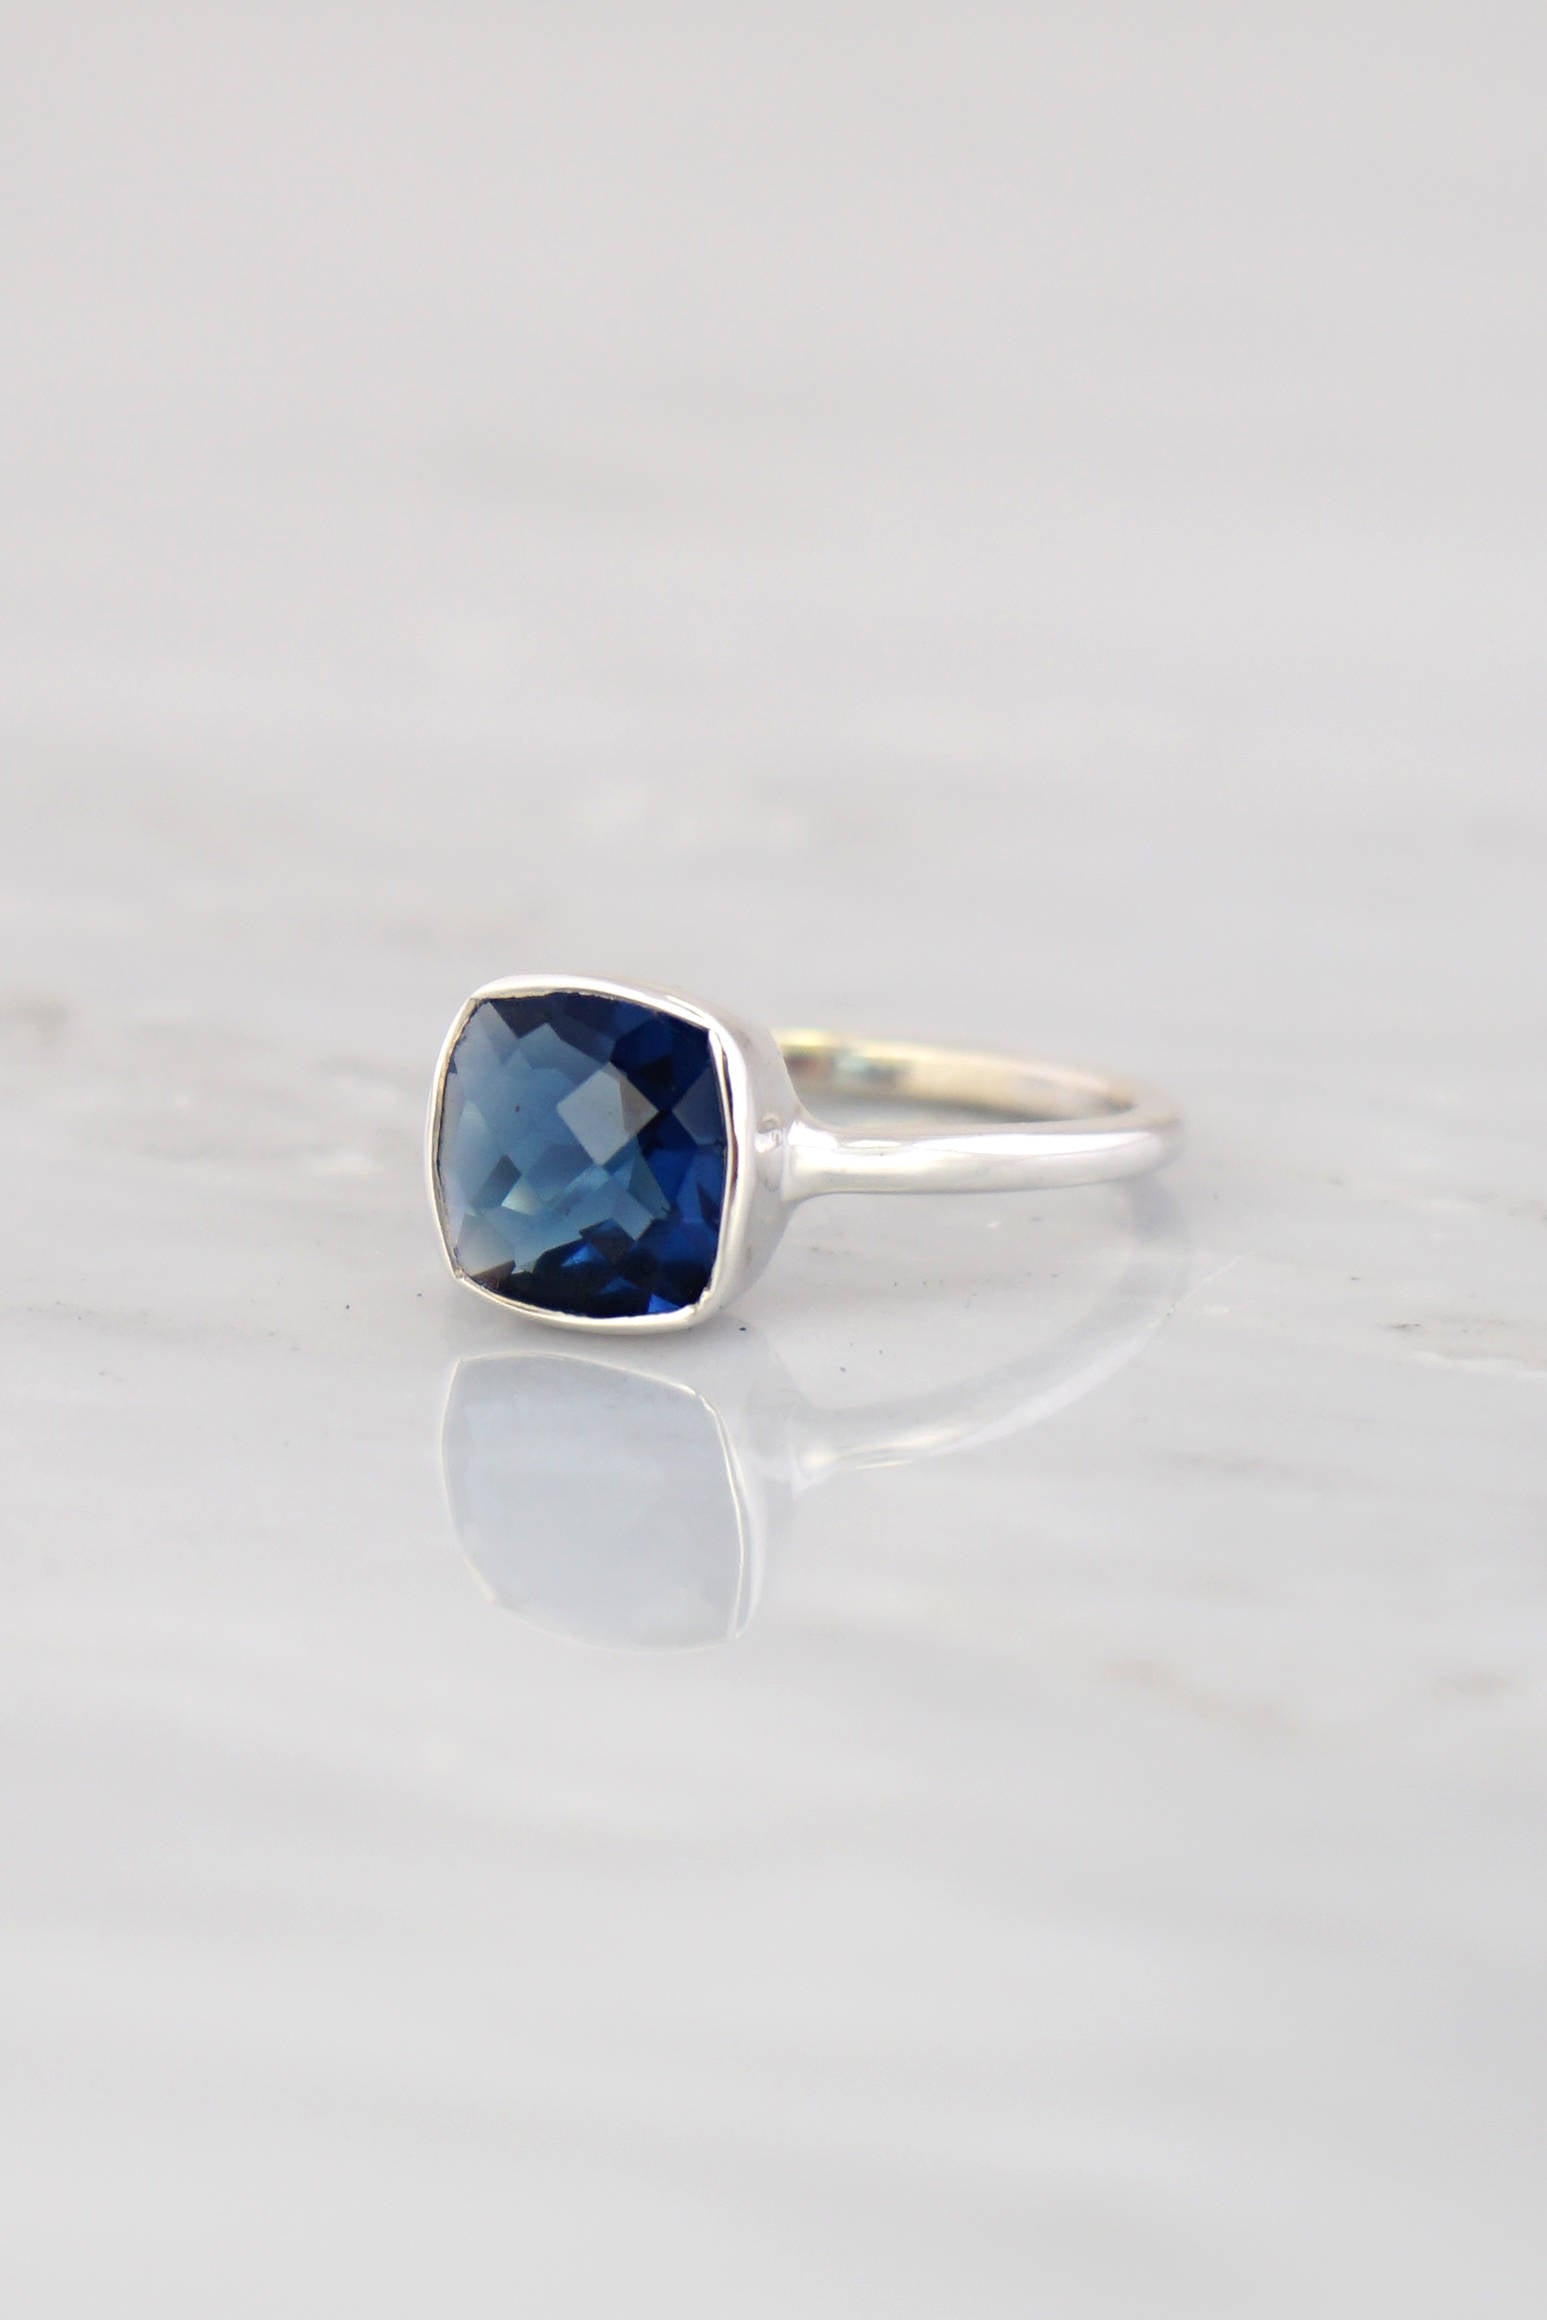 Vintage 8x6mm Oval Cut Blue Sapphire Engagement Ring 14k Rose Gold Unique  Art Deco September Birthstone Ring for Women - Oveela Jewelry